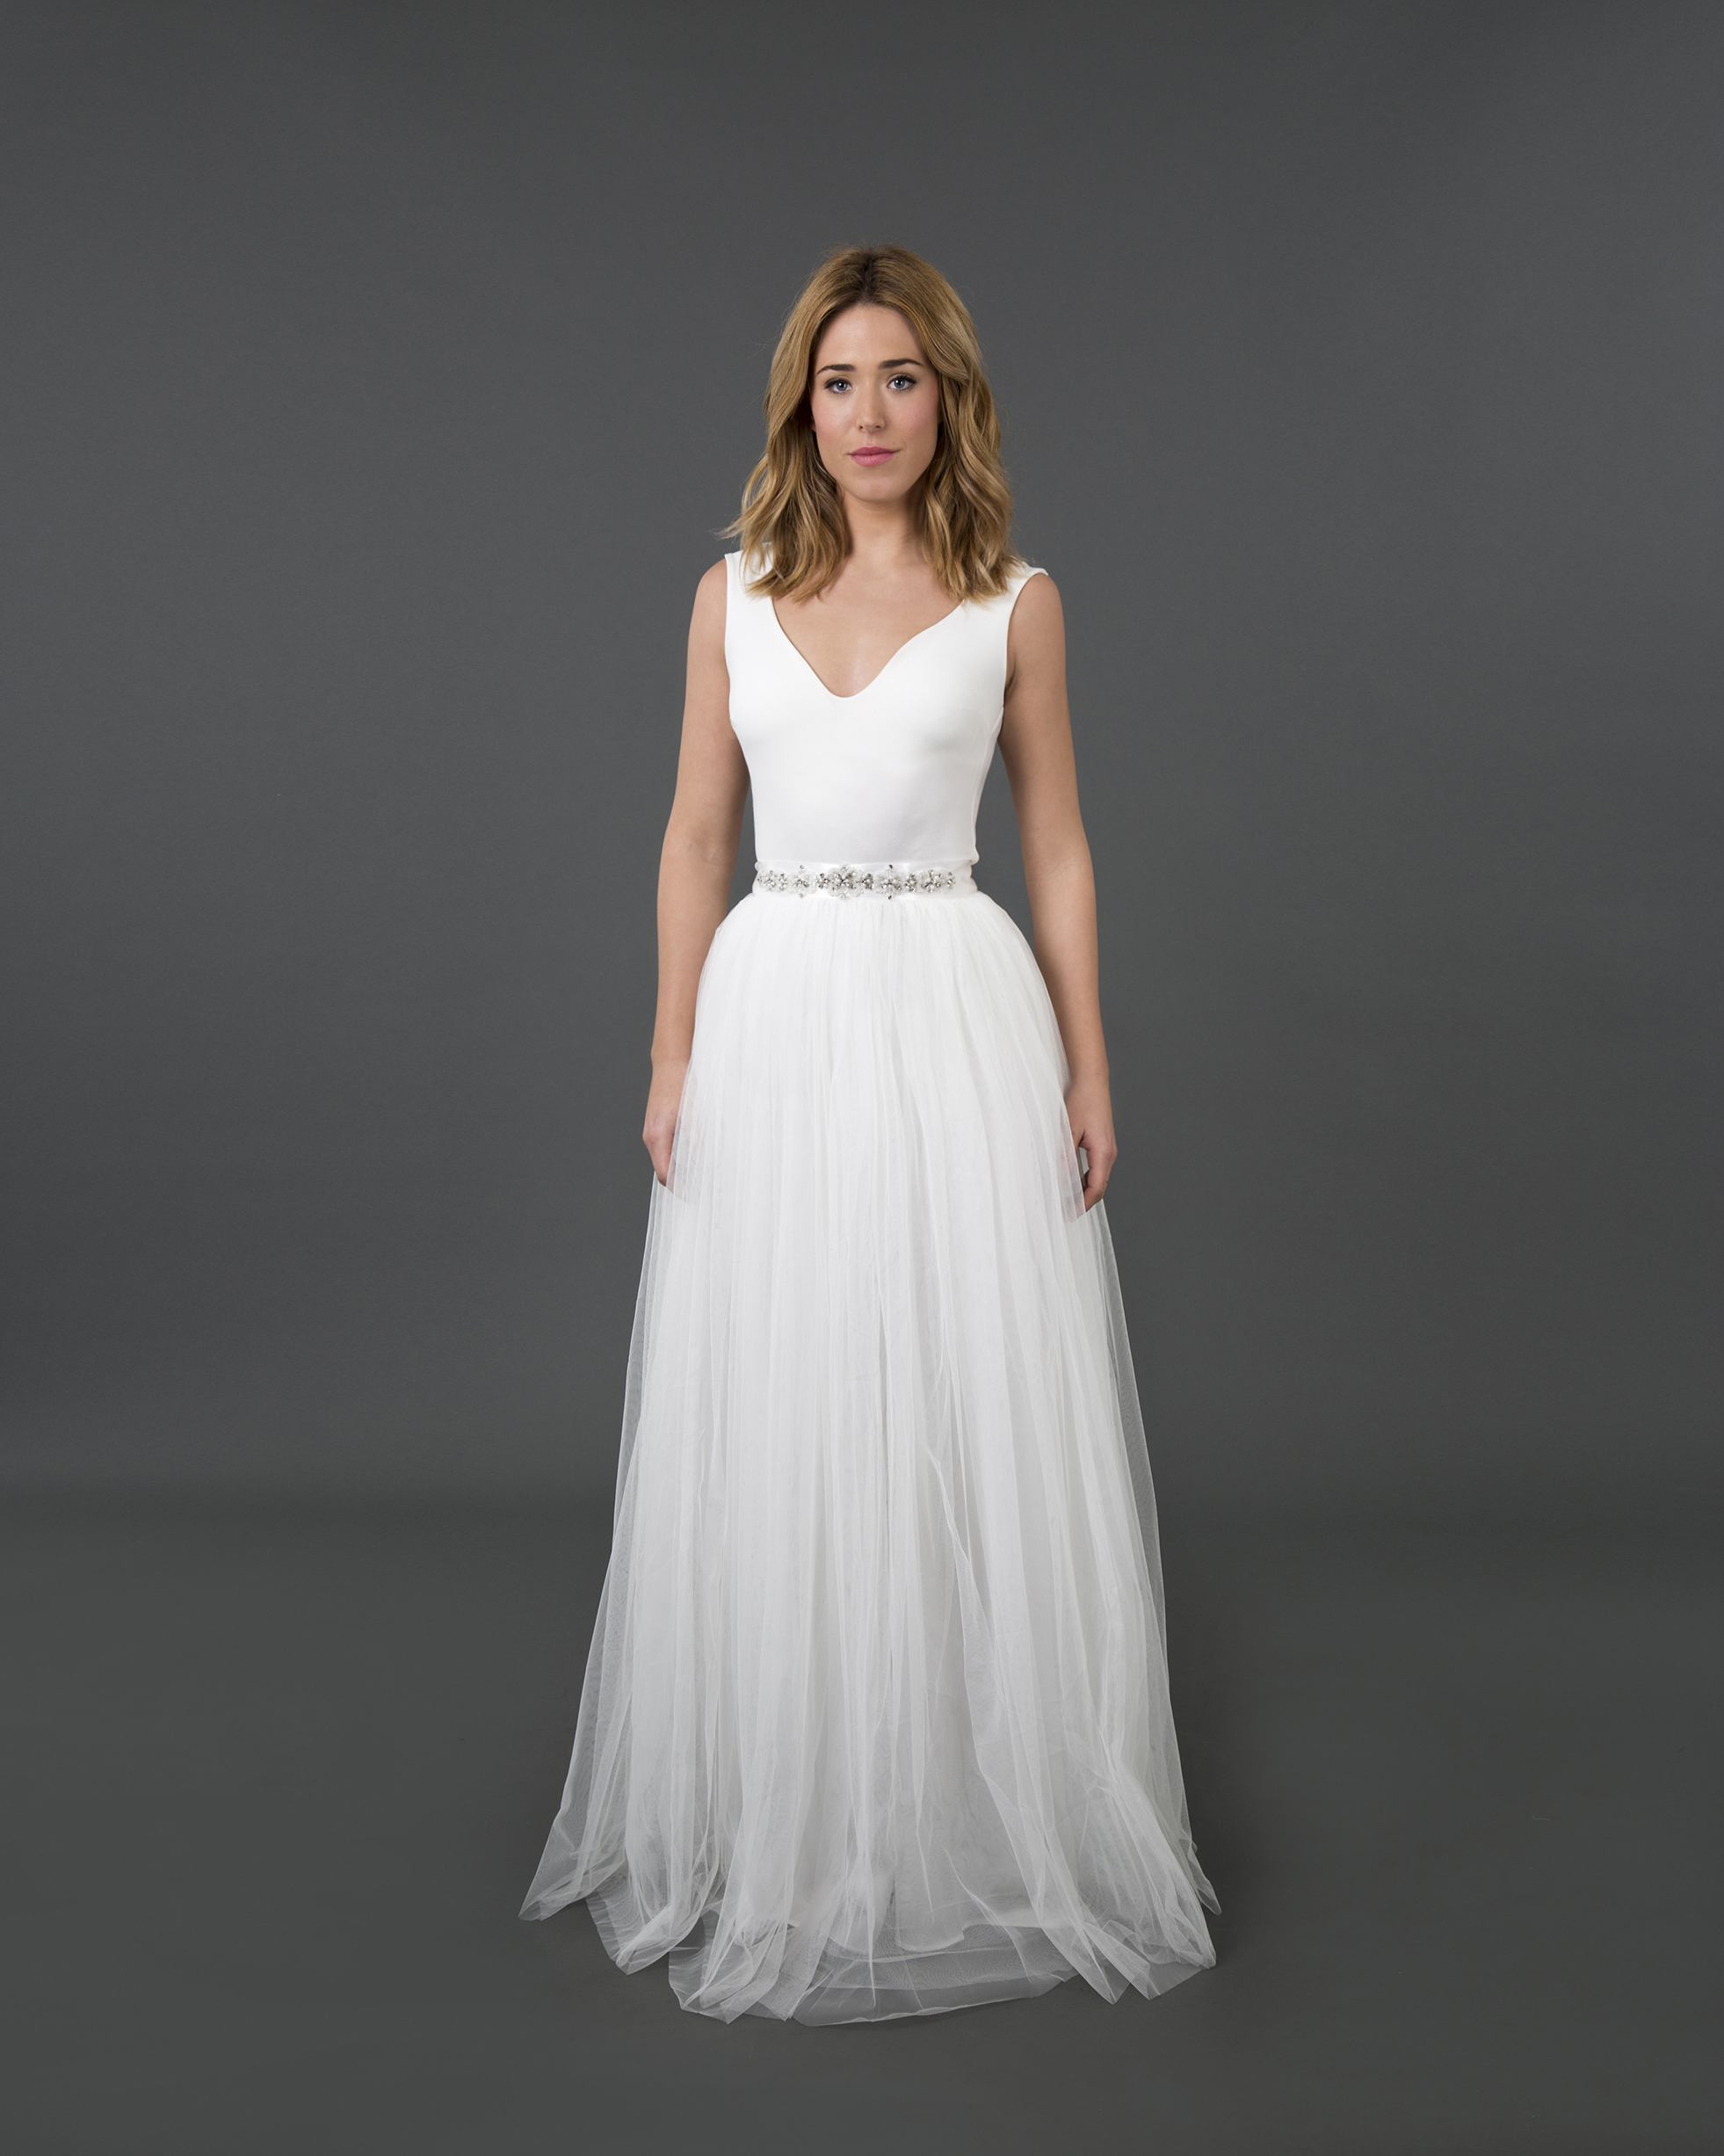 Asia top plus irene skirt, a bridal look created with two separates